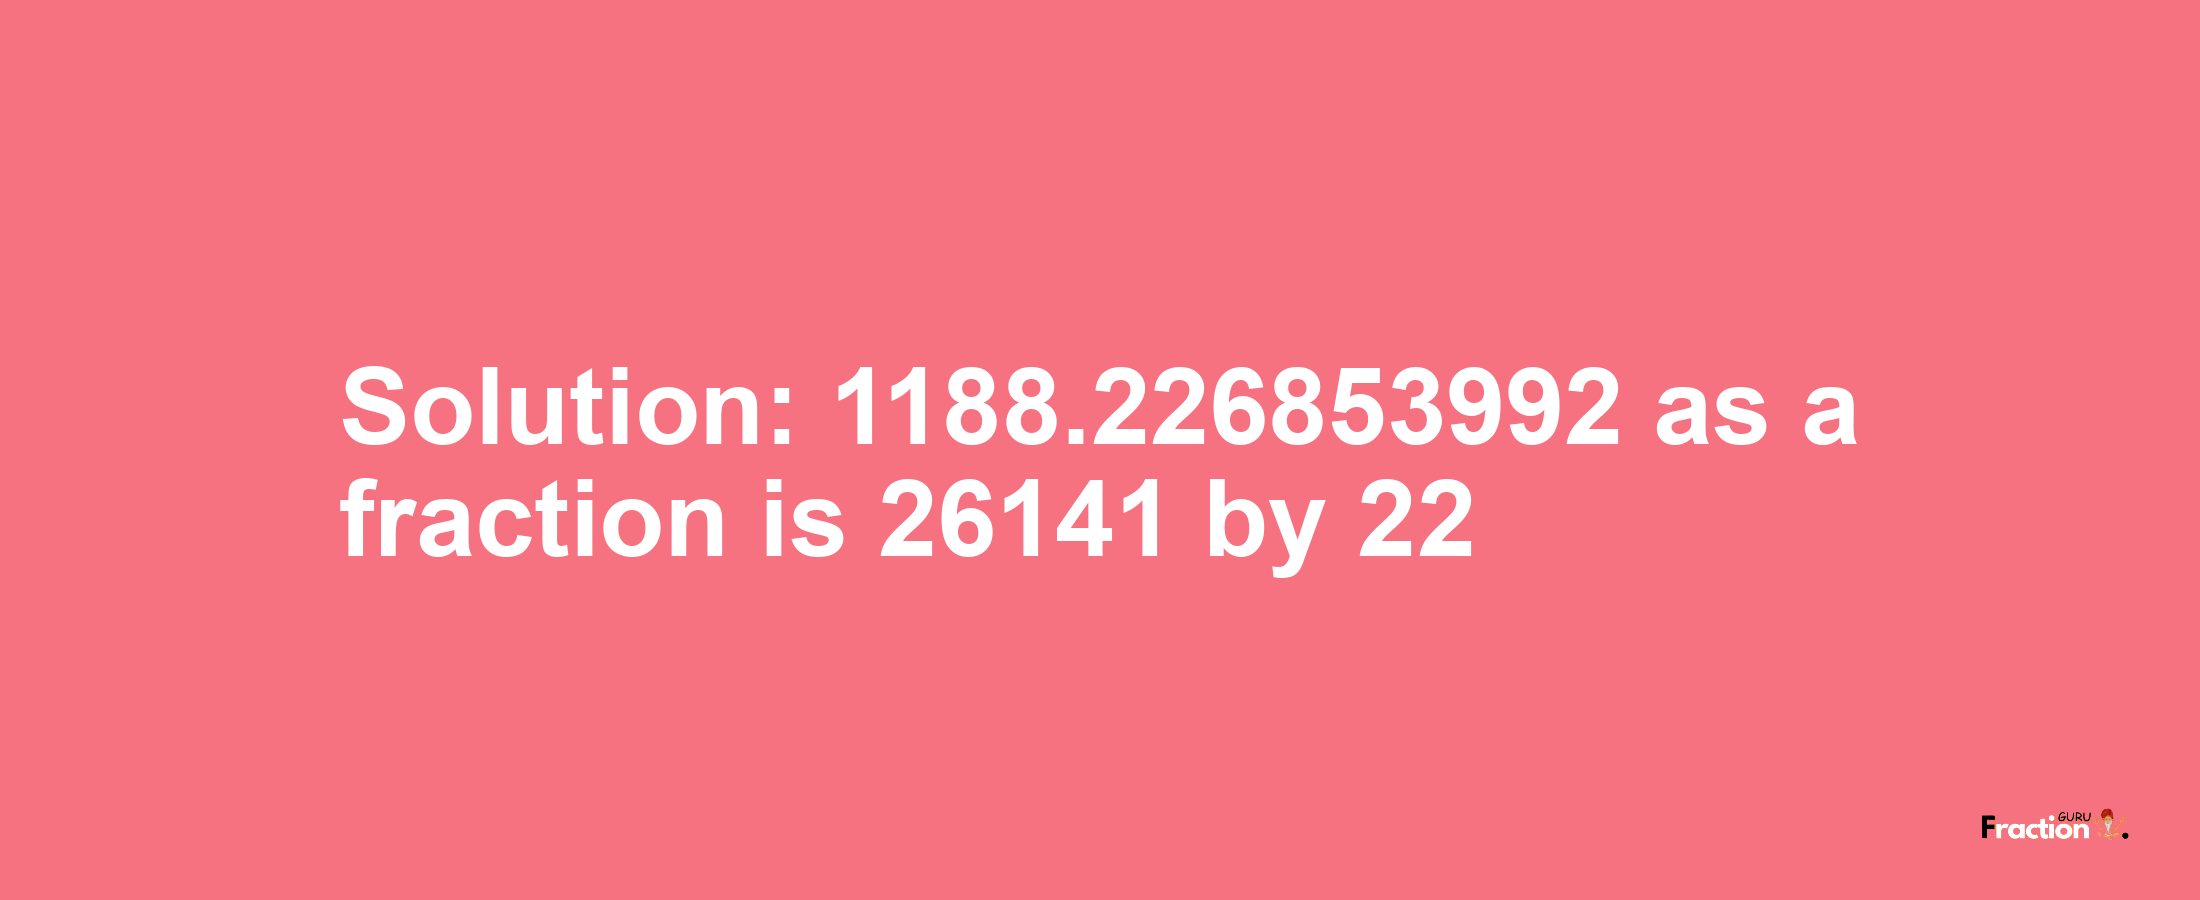 Solution:1188.226853992 as a fraction is 26141/22